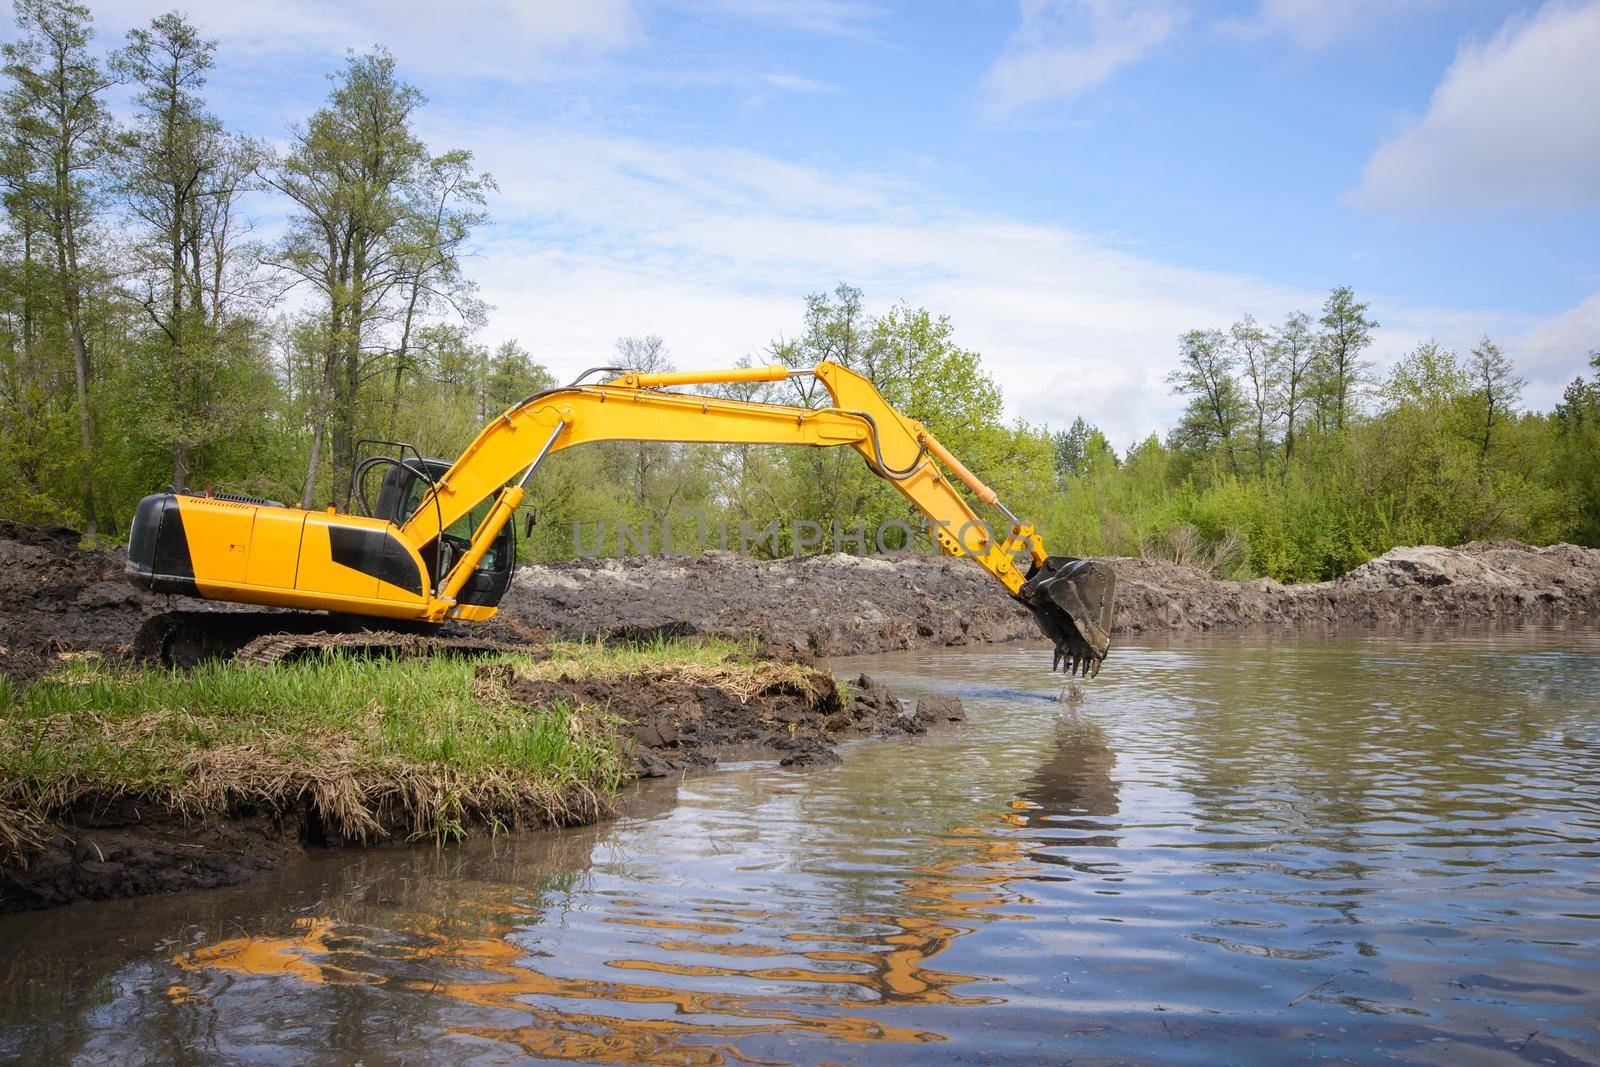 Excavator near small river or pond in countryside by VitaliiPetrushenko